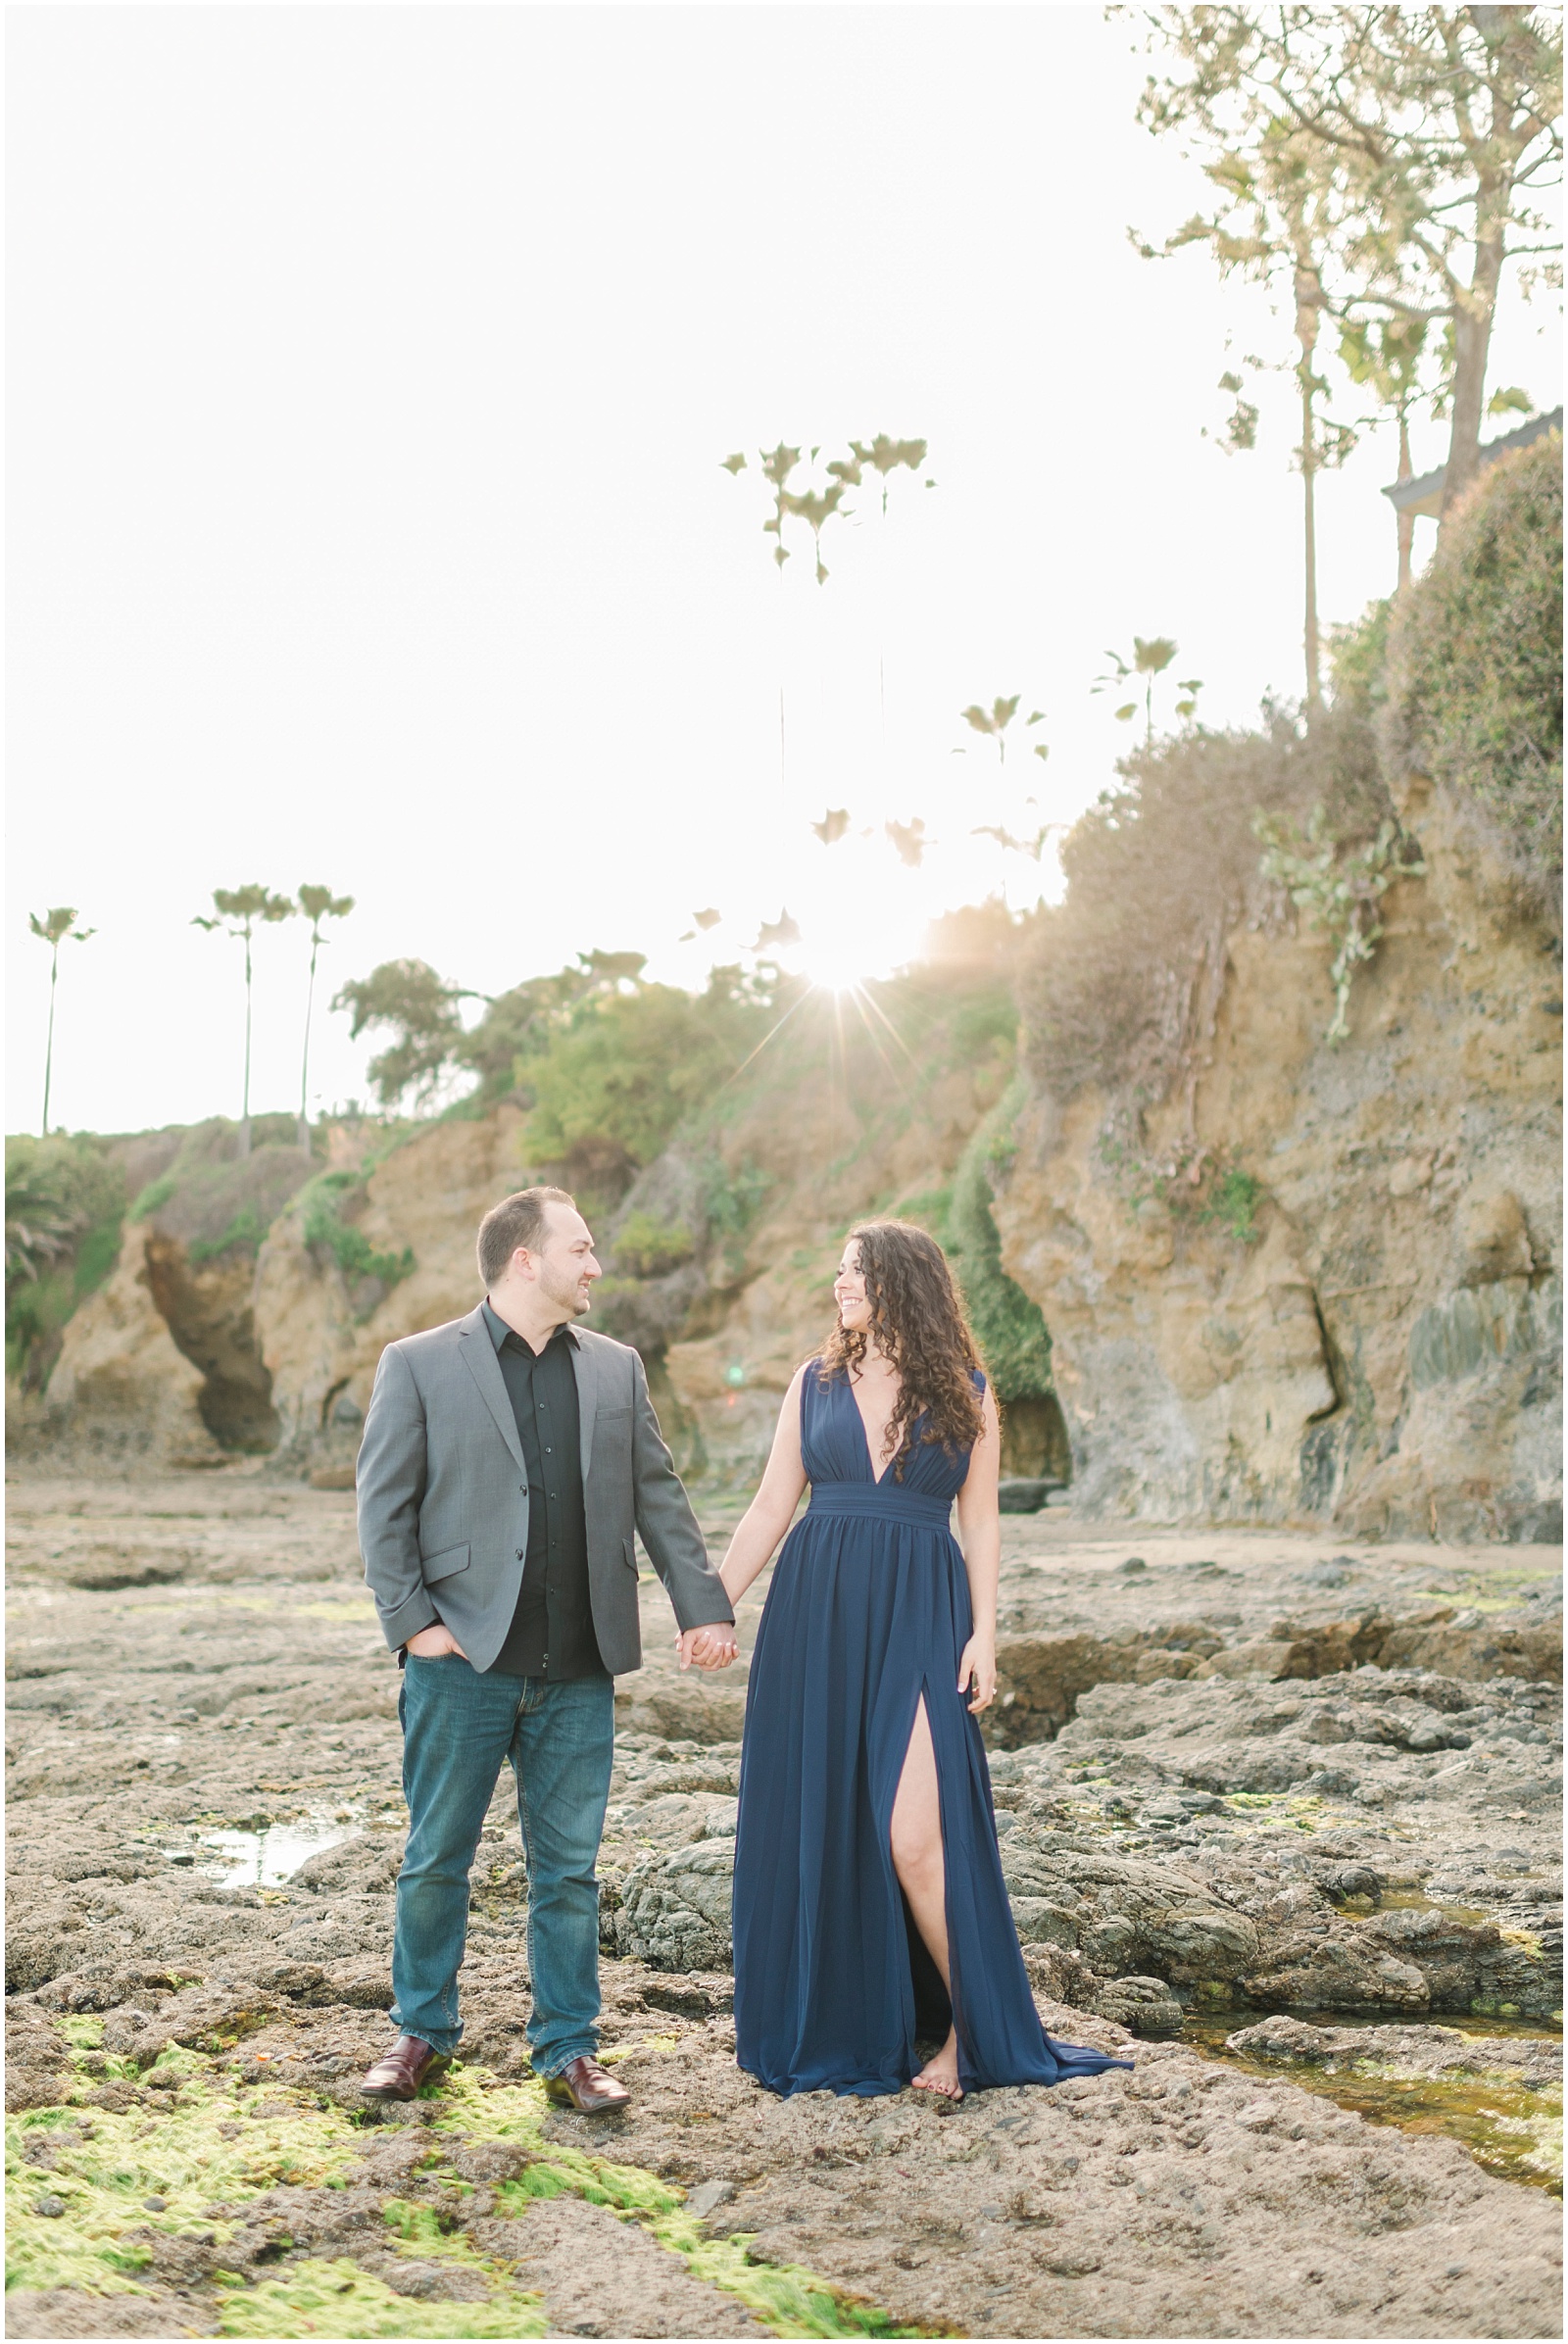 Laguna Beach Engagement Session. Photography by Mollie Jane Photography.  To see more, go to www.molliejanephotography.com